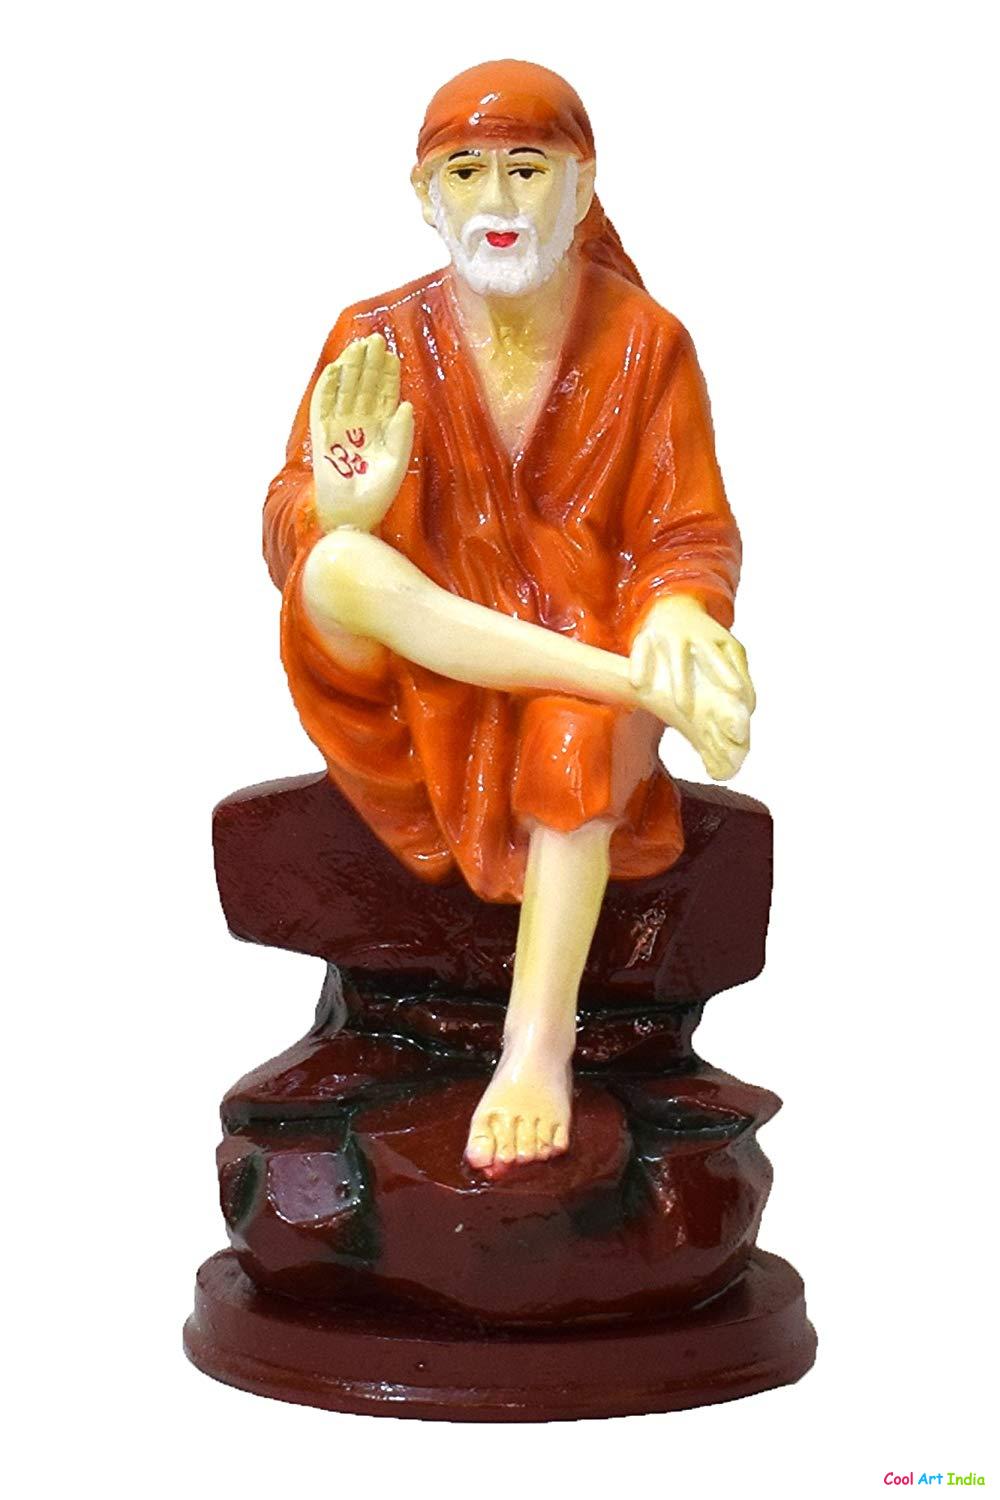 Art Sai Baba Statues Created by Verma Arts Gallery: Cool Art India